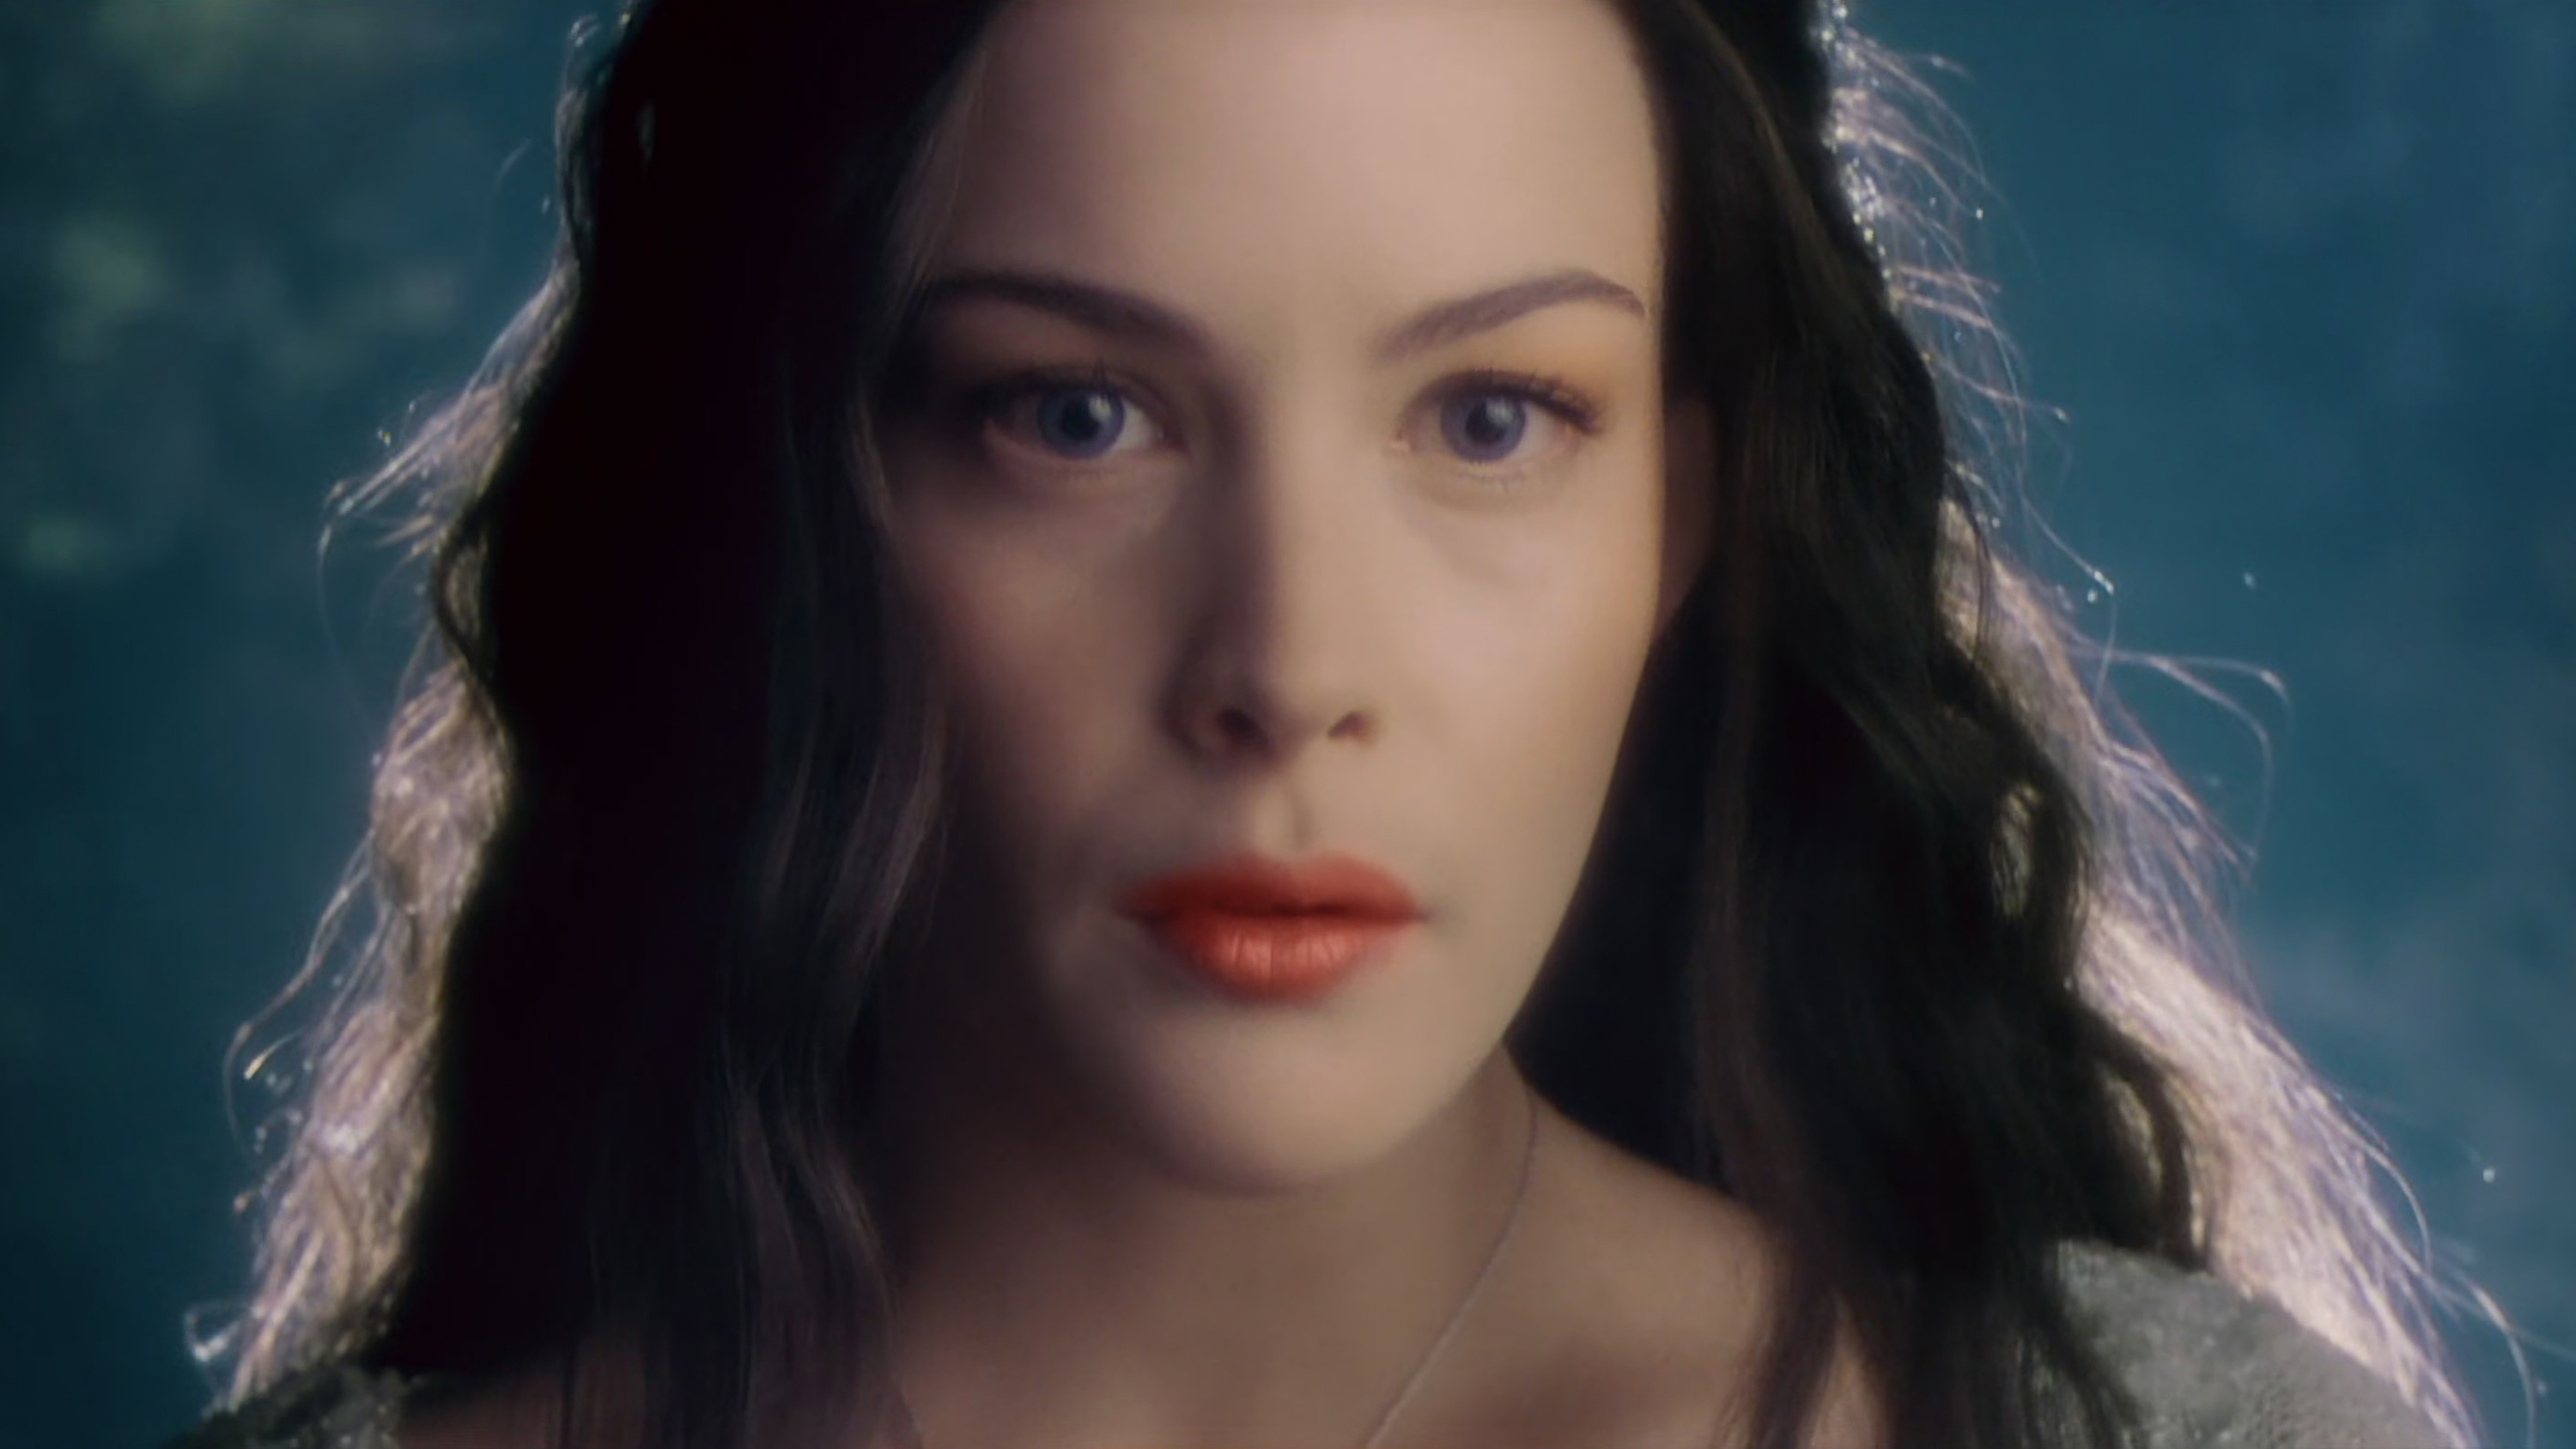 The Lady Arwen from The Lord of the Rings movies